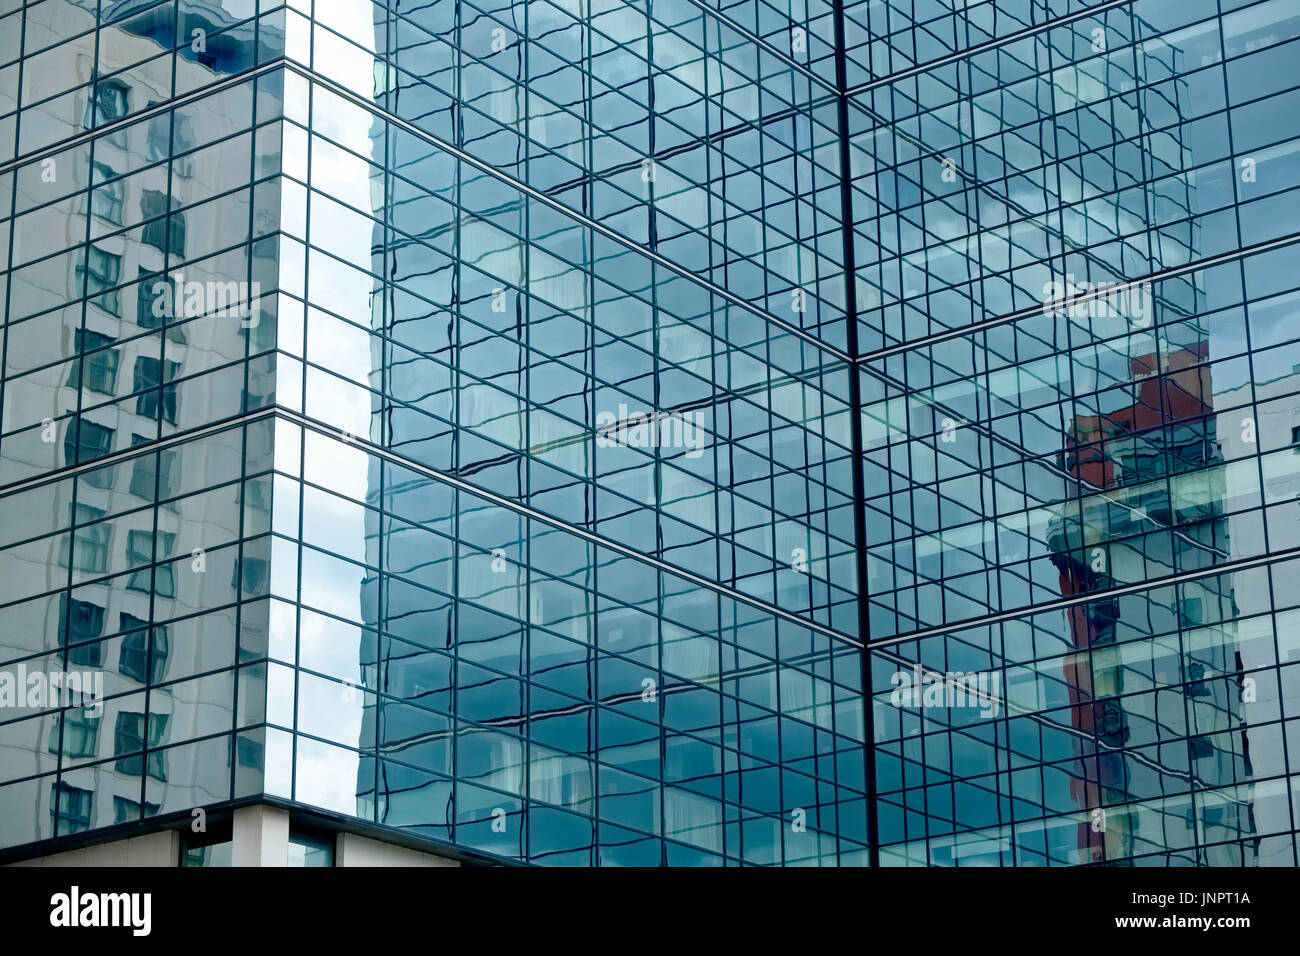 A modern glass commercial building with reflections of other commercial buidlings Stock Photo